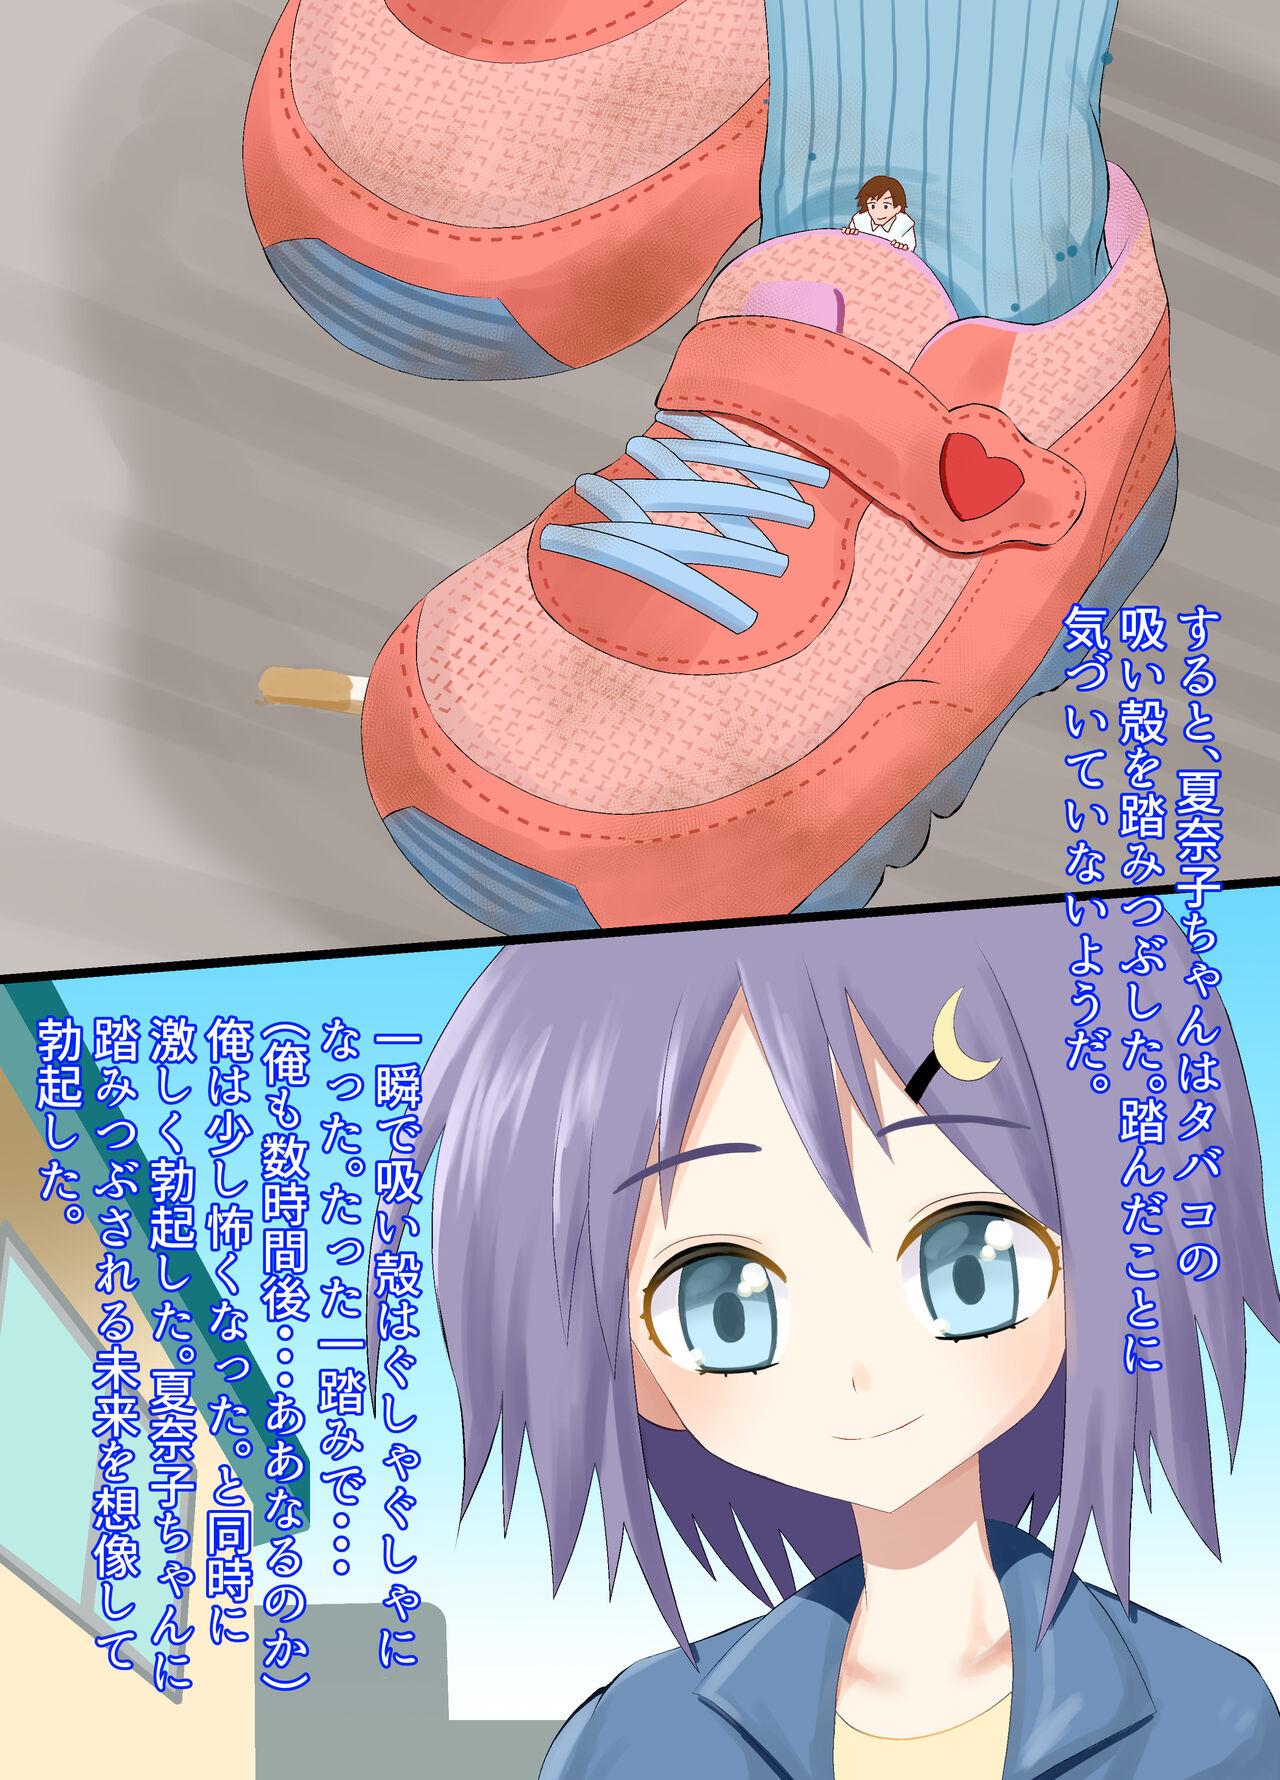 A CG collection of getting smaller and being stepped on by a girl 7